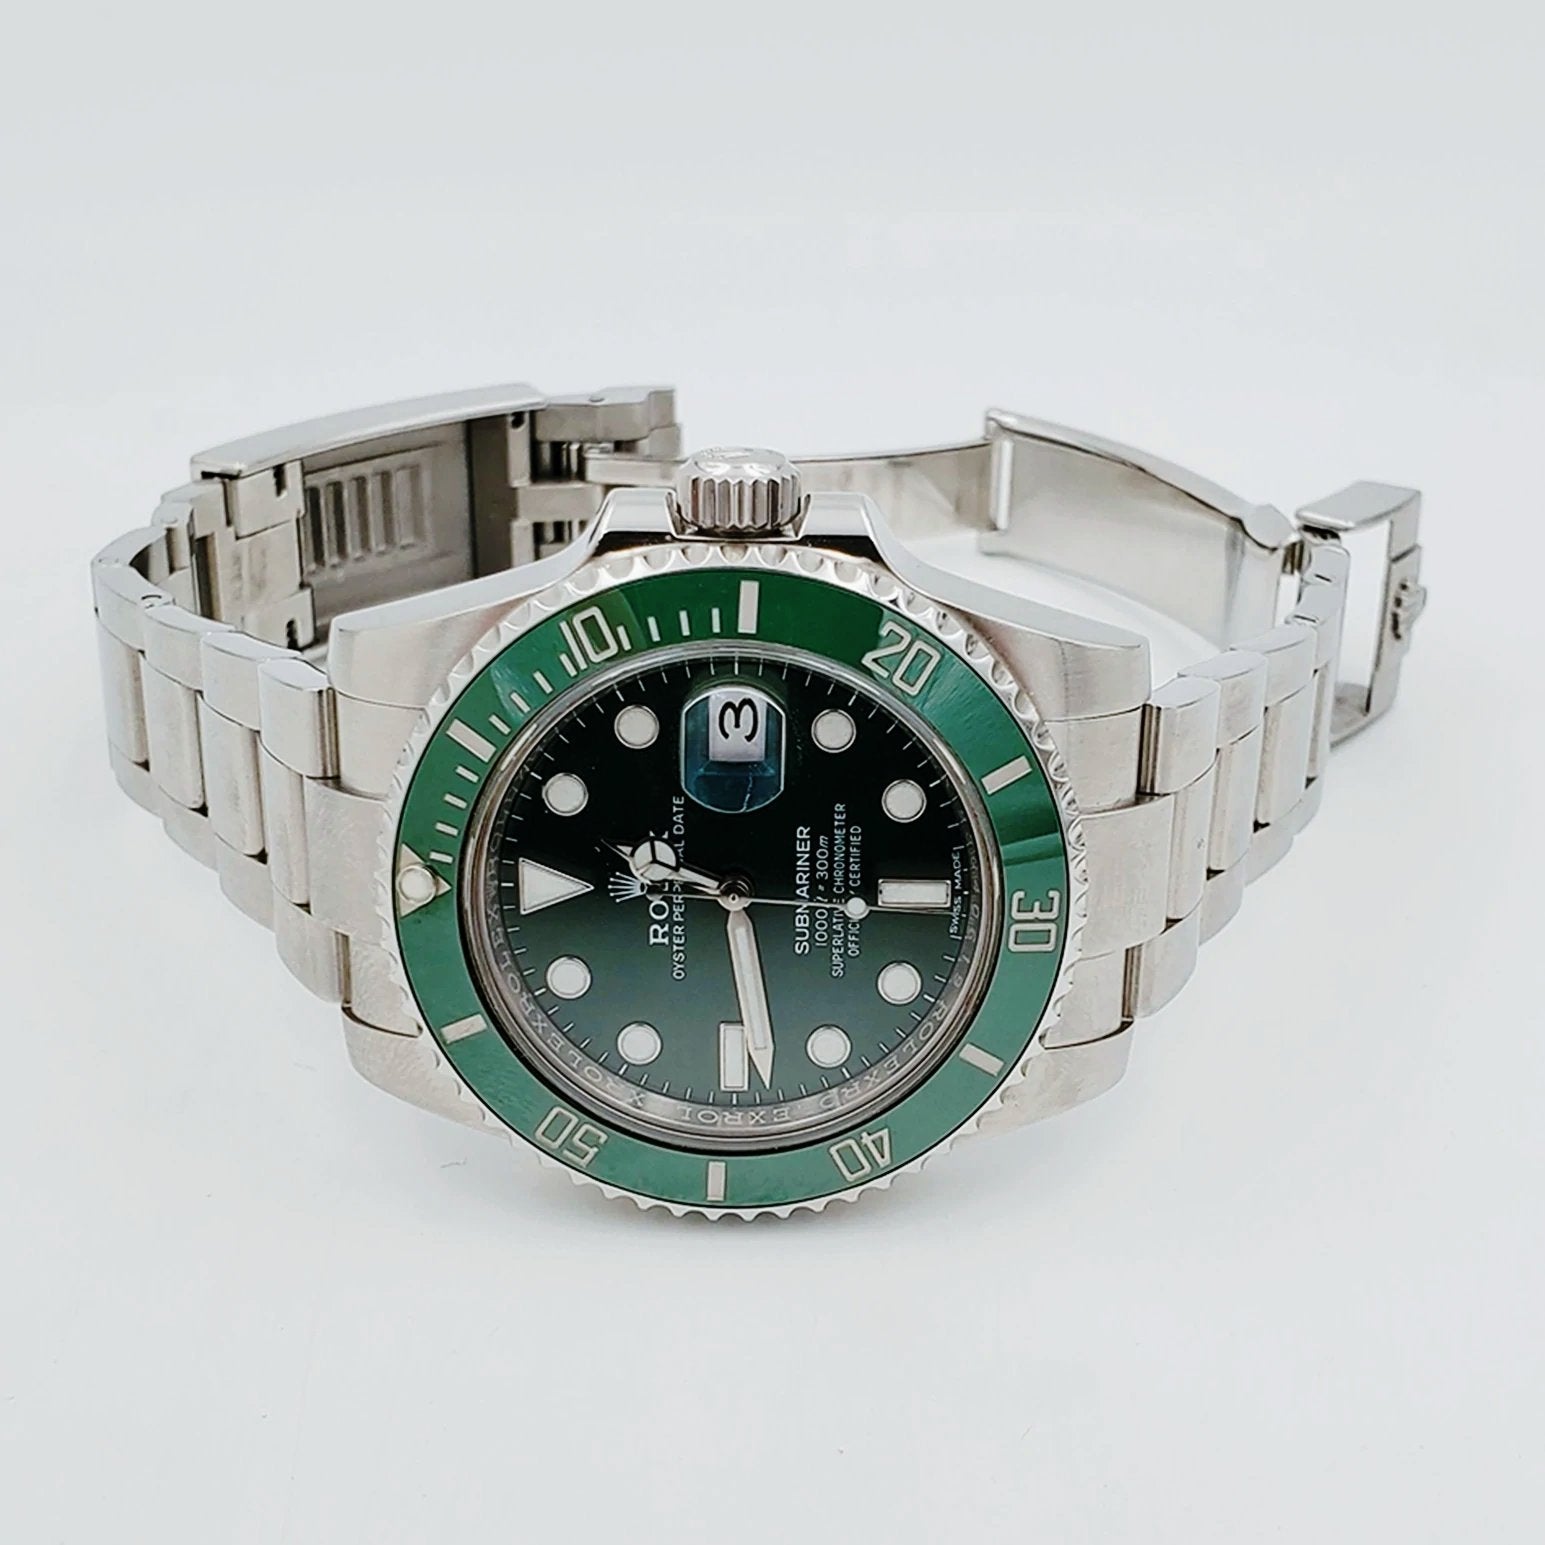 Men's Rolex 40mm Submariner Date Oyster Perpetual Stainless Steel Watch with Green Dial and Green Bezel. (Pre-Owned 116610LV)